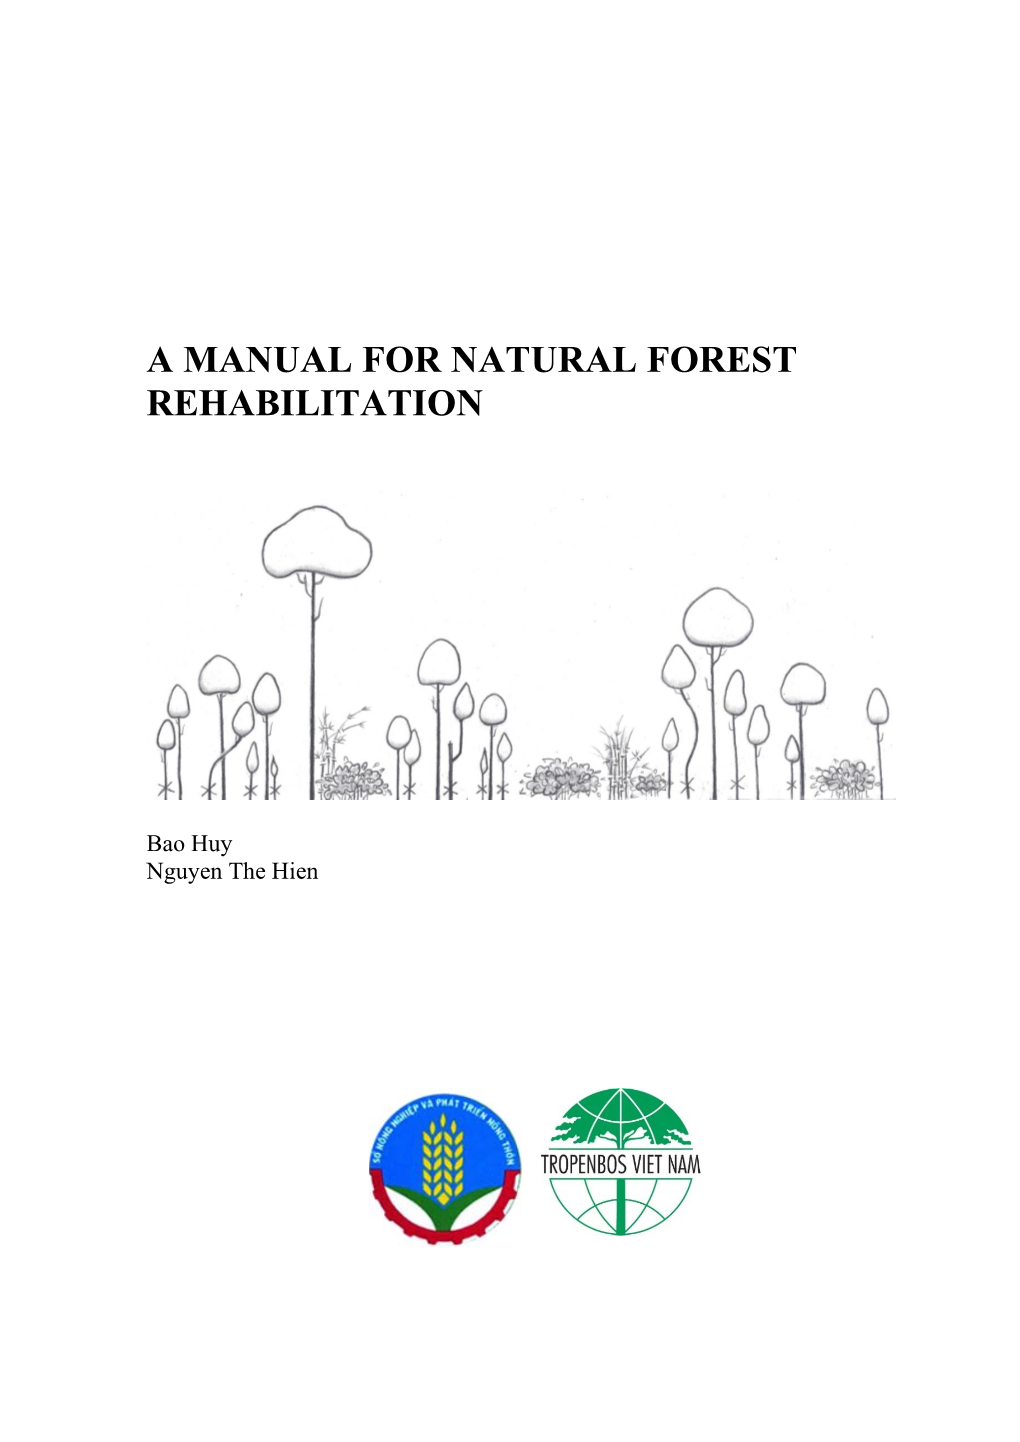 A Manual for Natural Forest Rehabilitation